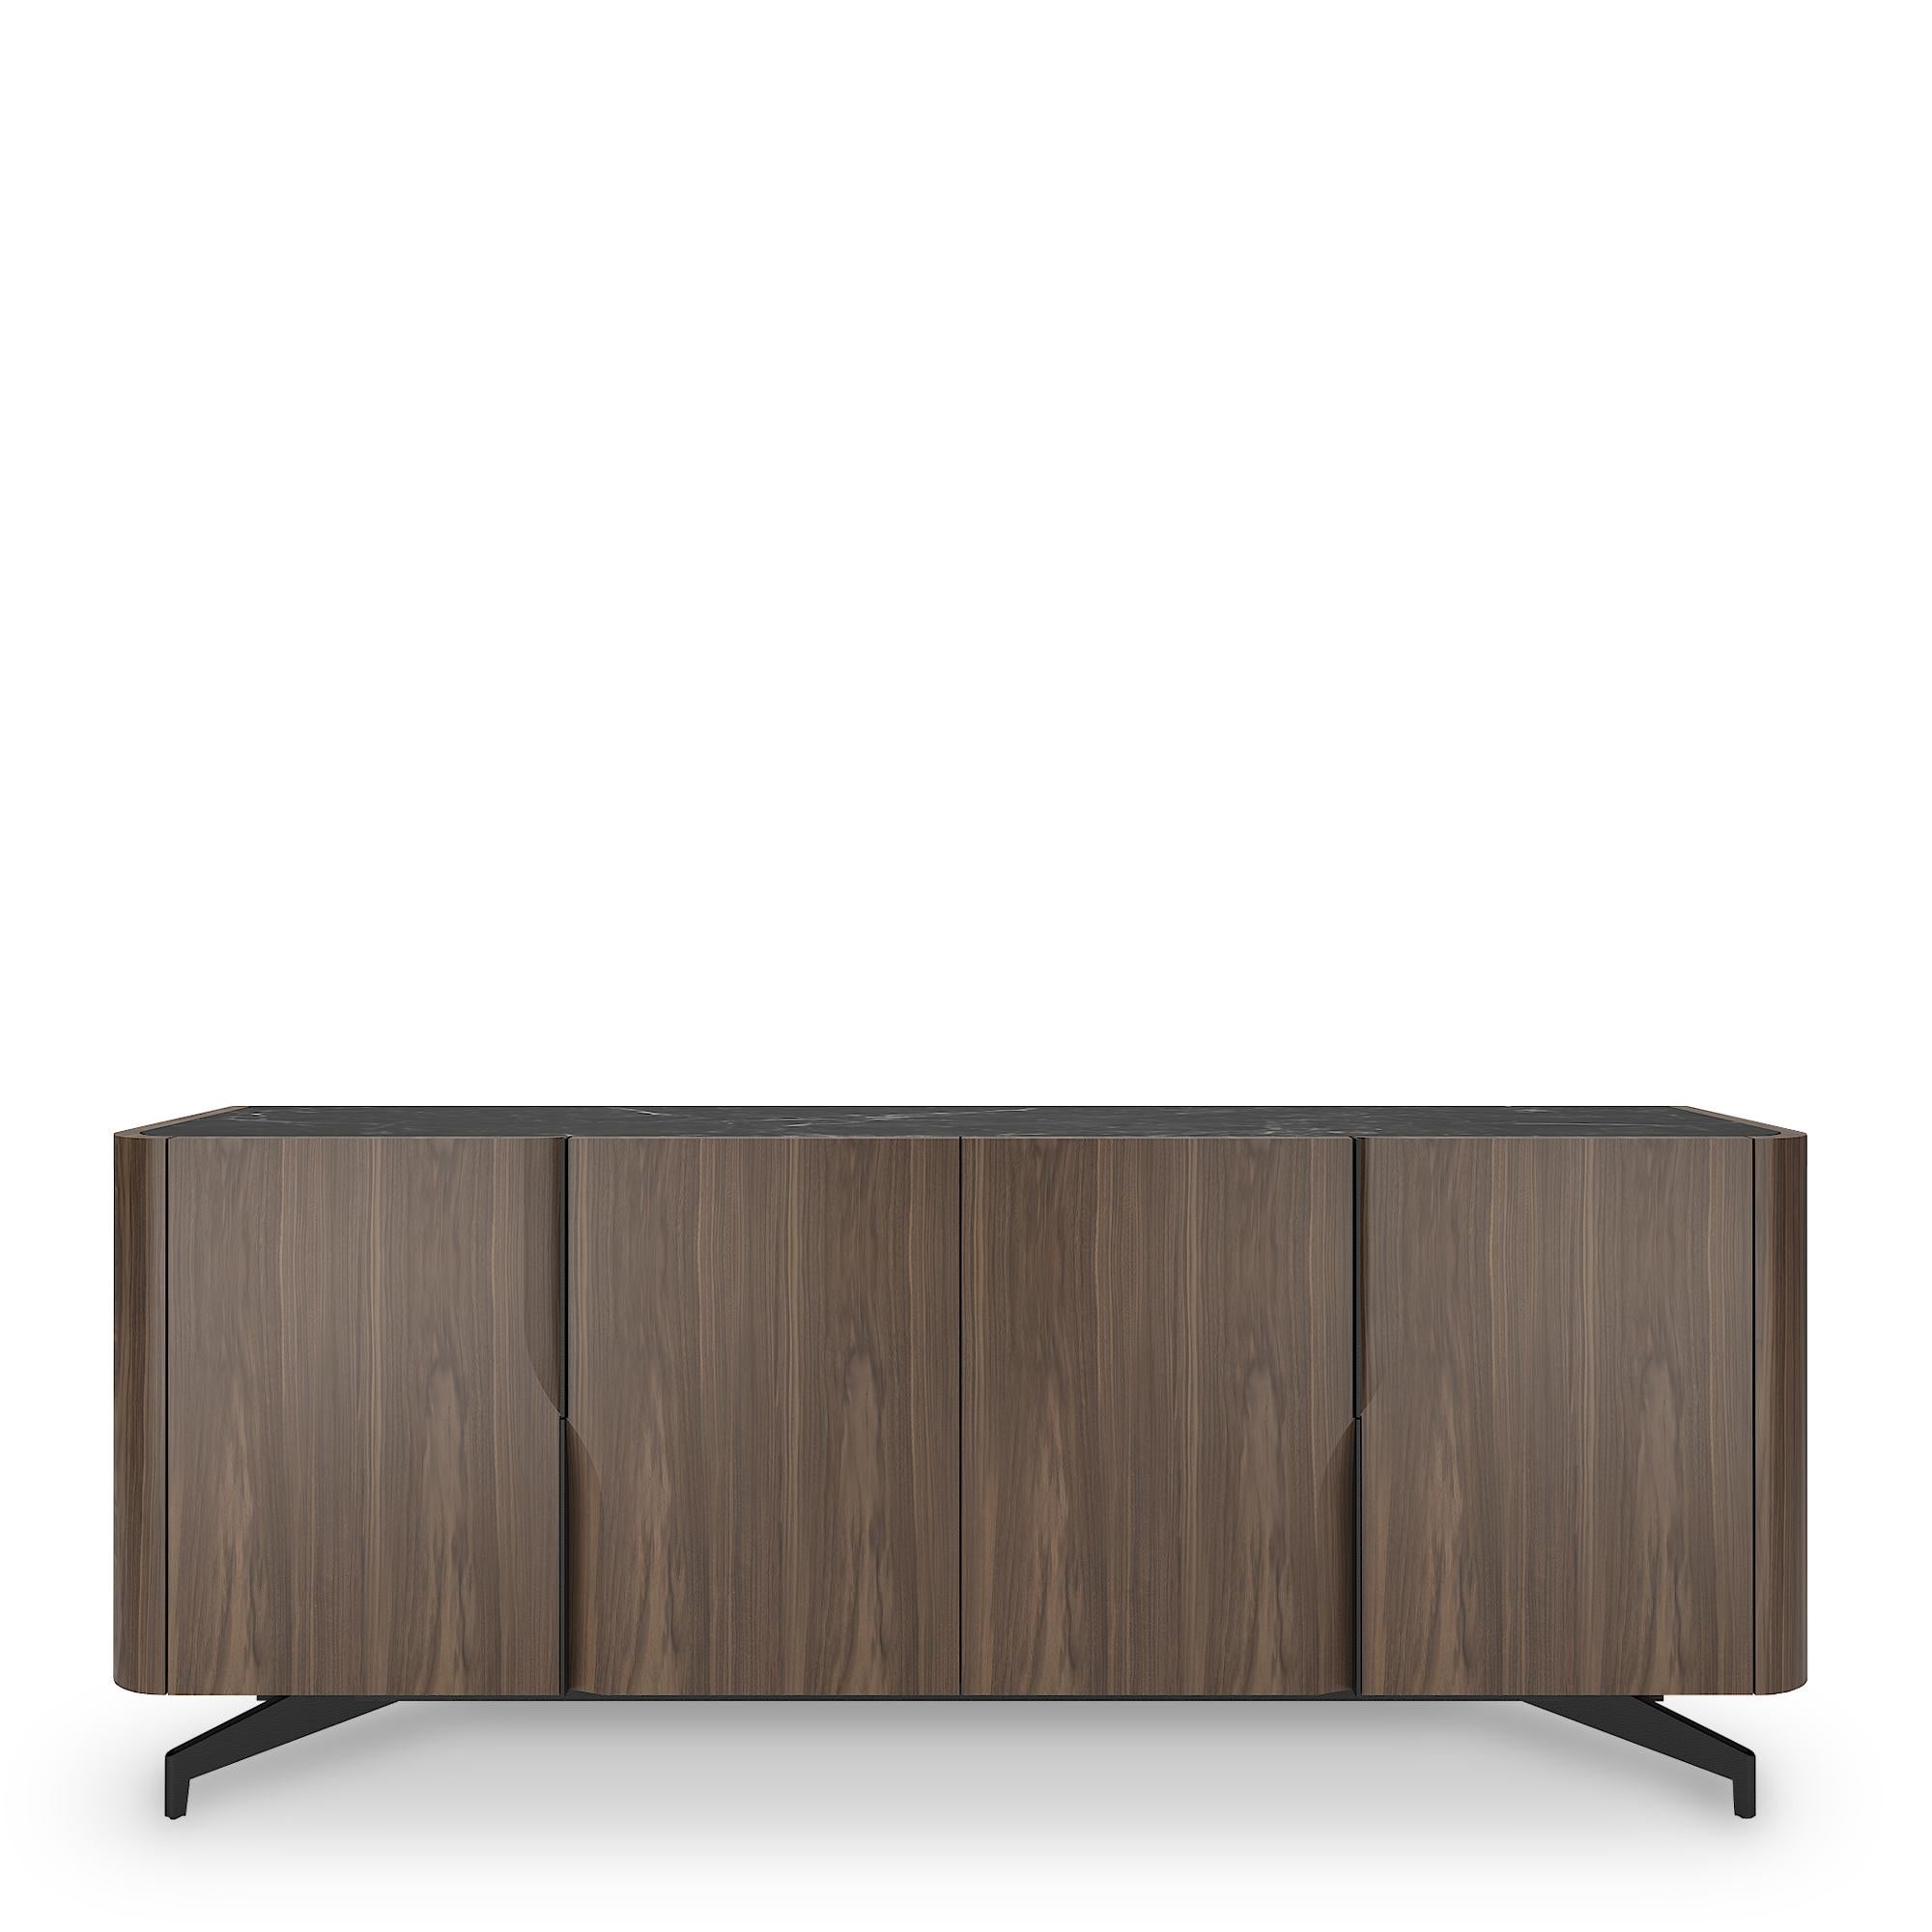 The Wind sideboard, which is 100% produced in Portugal (Europe), creates a beautiful contrast by combining the round movement of curved and smooth wood veneer lines with completely integrated metallic handles. 

Designed by the French product